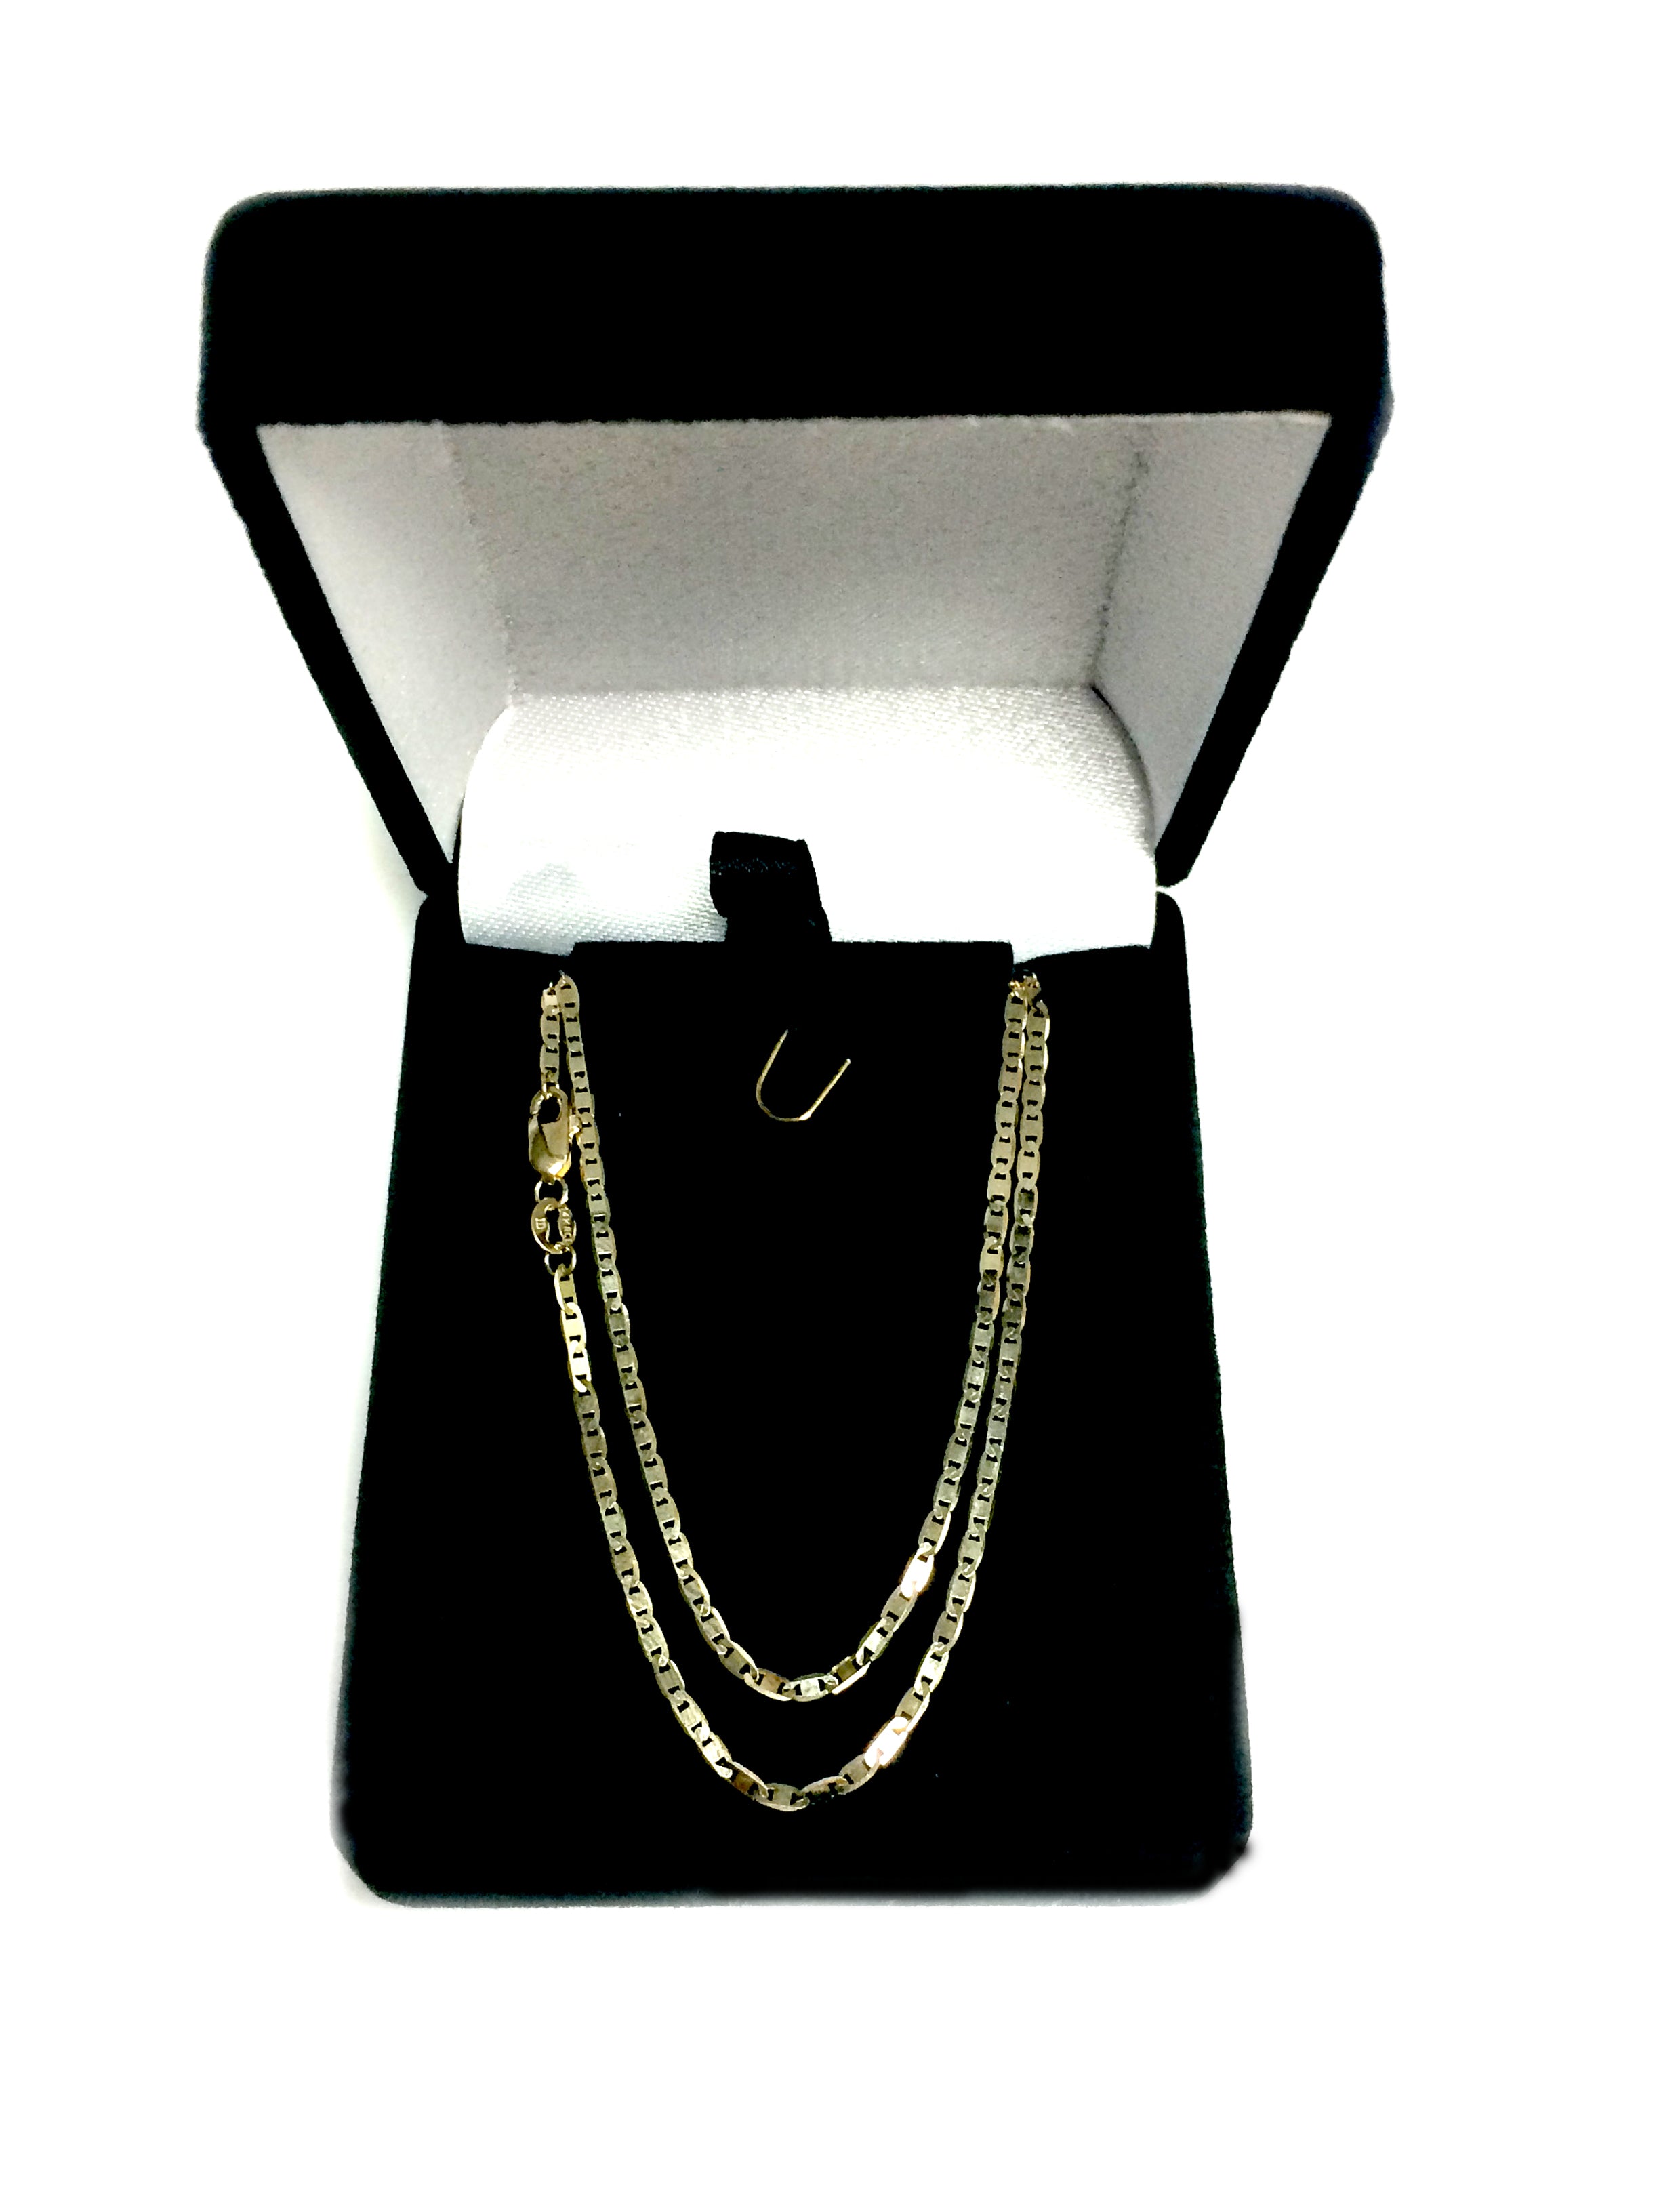 10k Yellow Gold Mariner Link Chain Necklace, 1.7mm fine designer jewelry for men and women